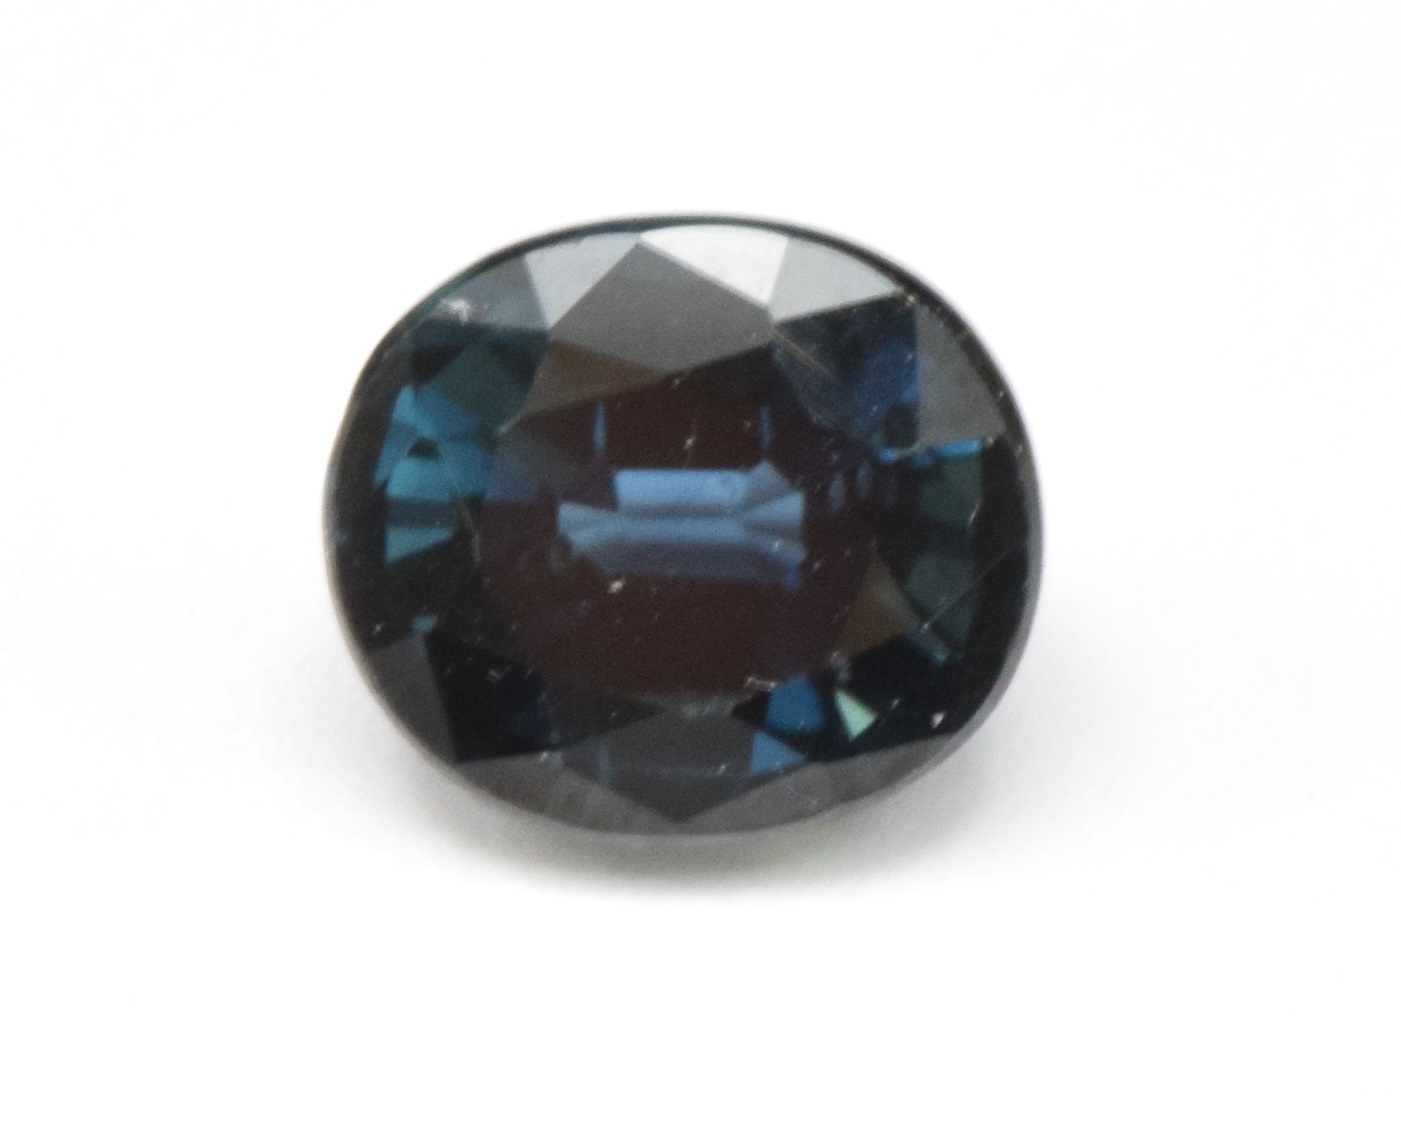 A loose 1.43ct oval cut natural sapphire, with certificate